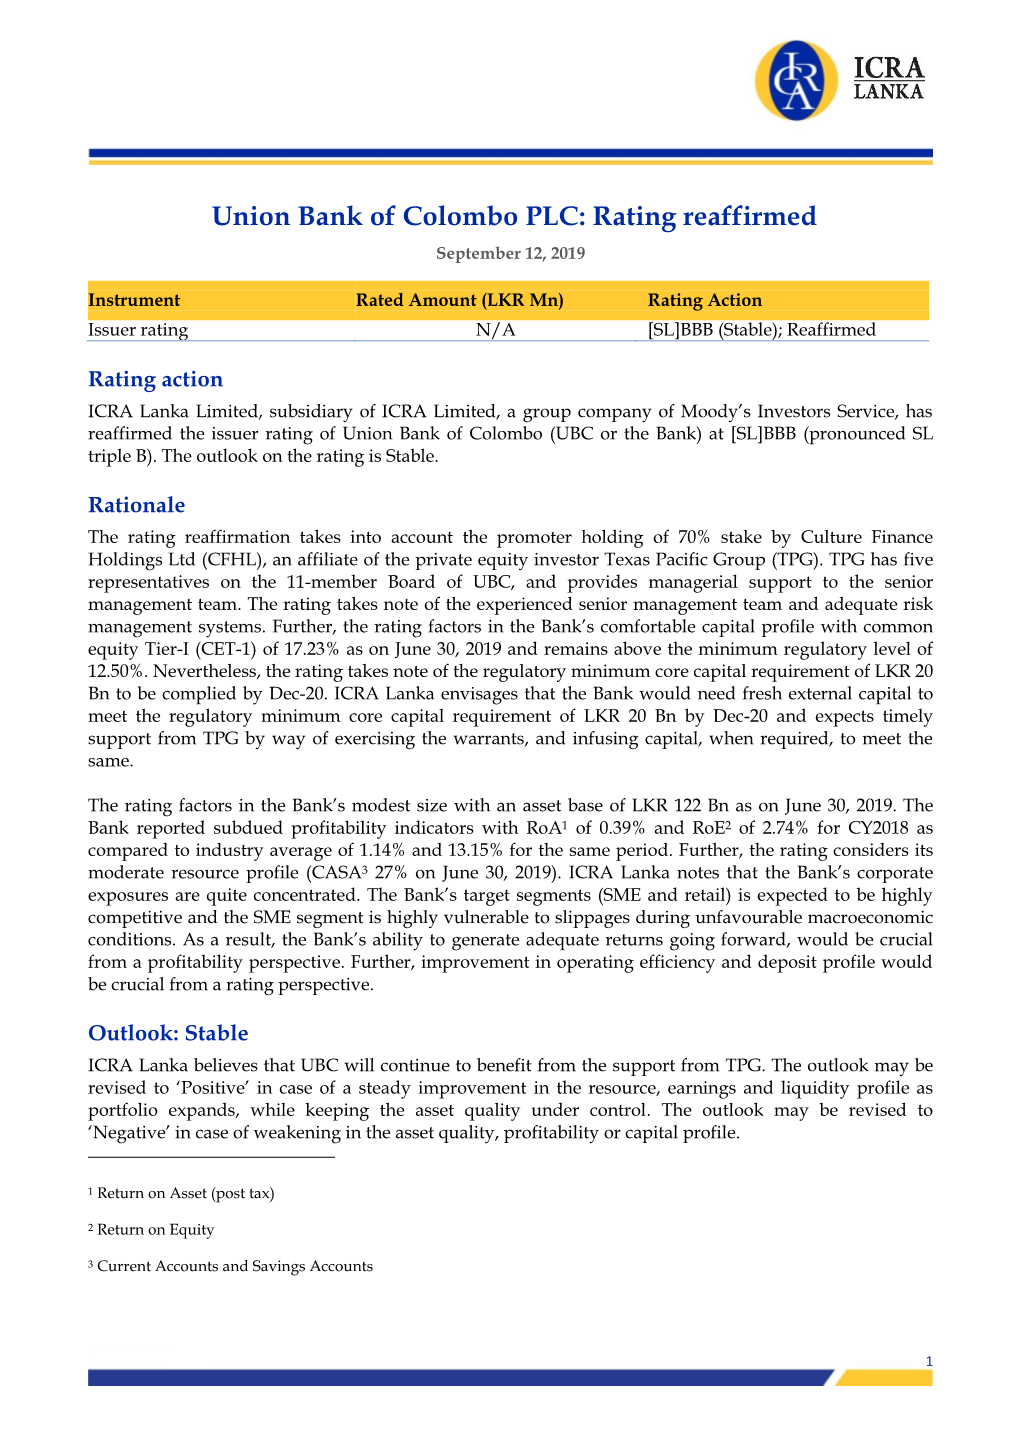 Union Bank of Colombo PLC: Rating Reaffirmed September 12, 2019